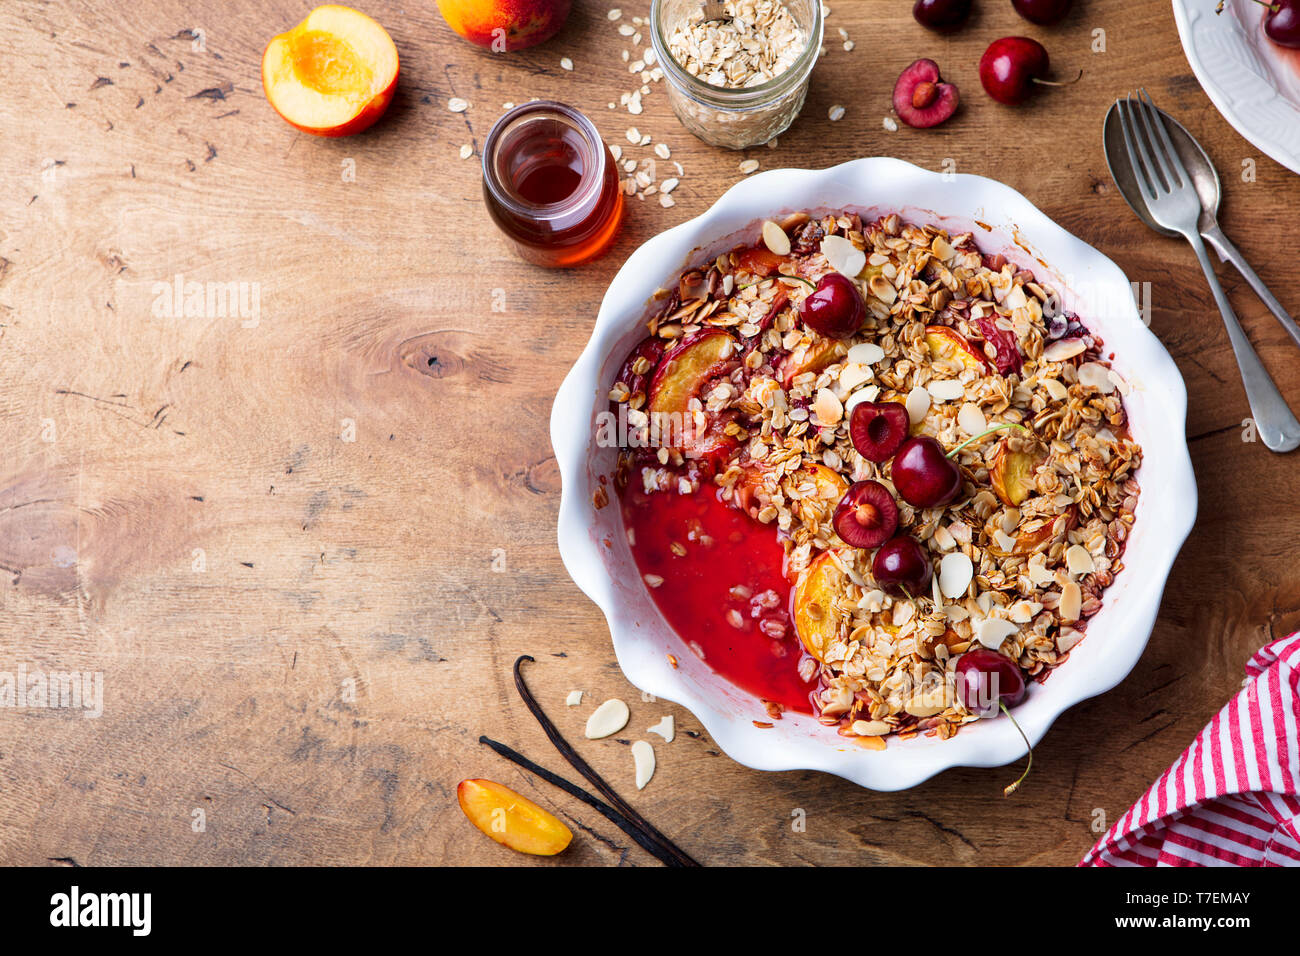 Peach and berry crumble in a baking dish. Top view. Copy space. Stock Photo